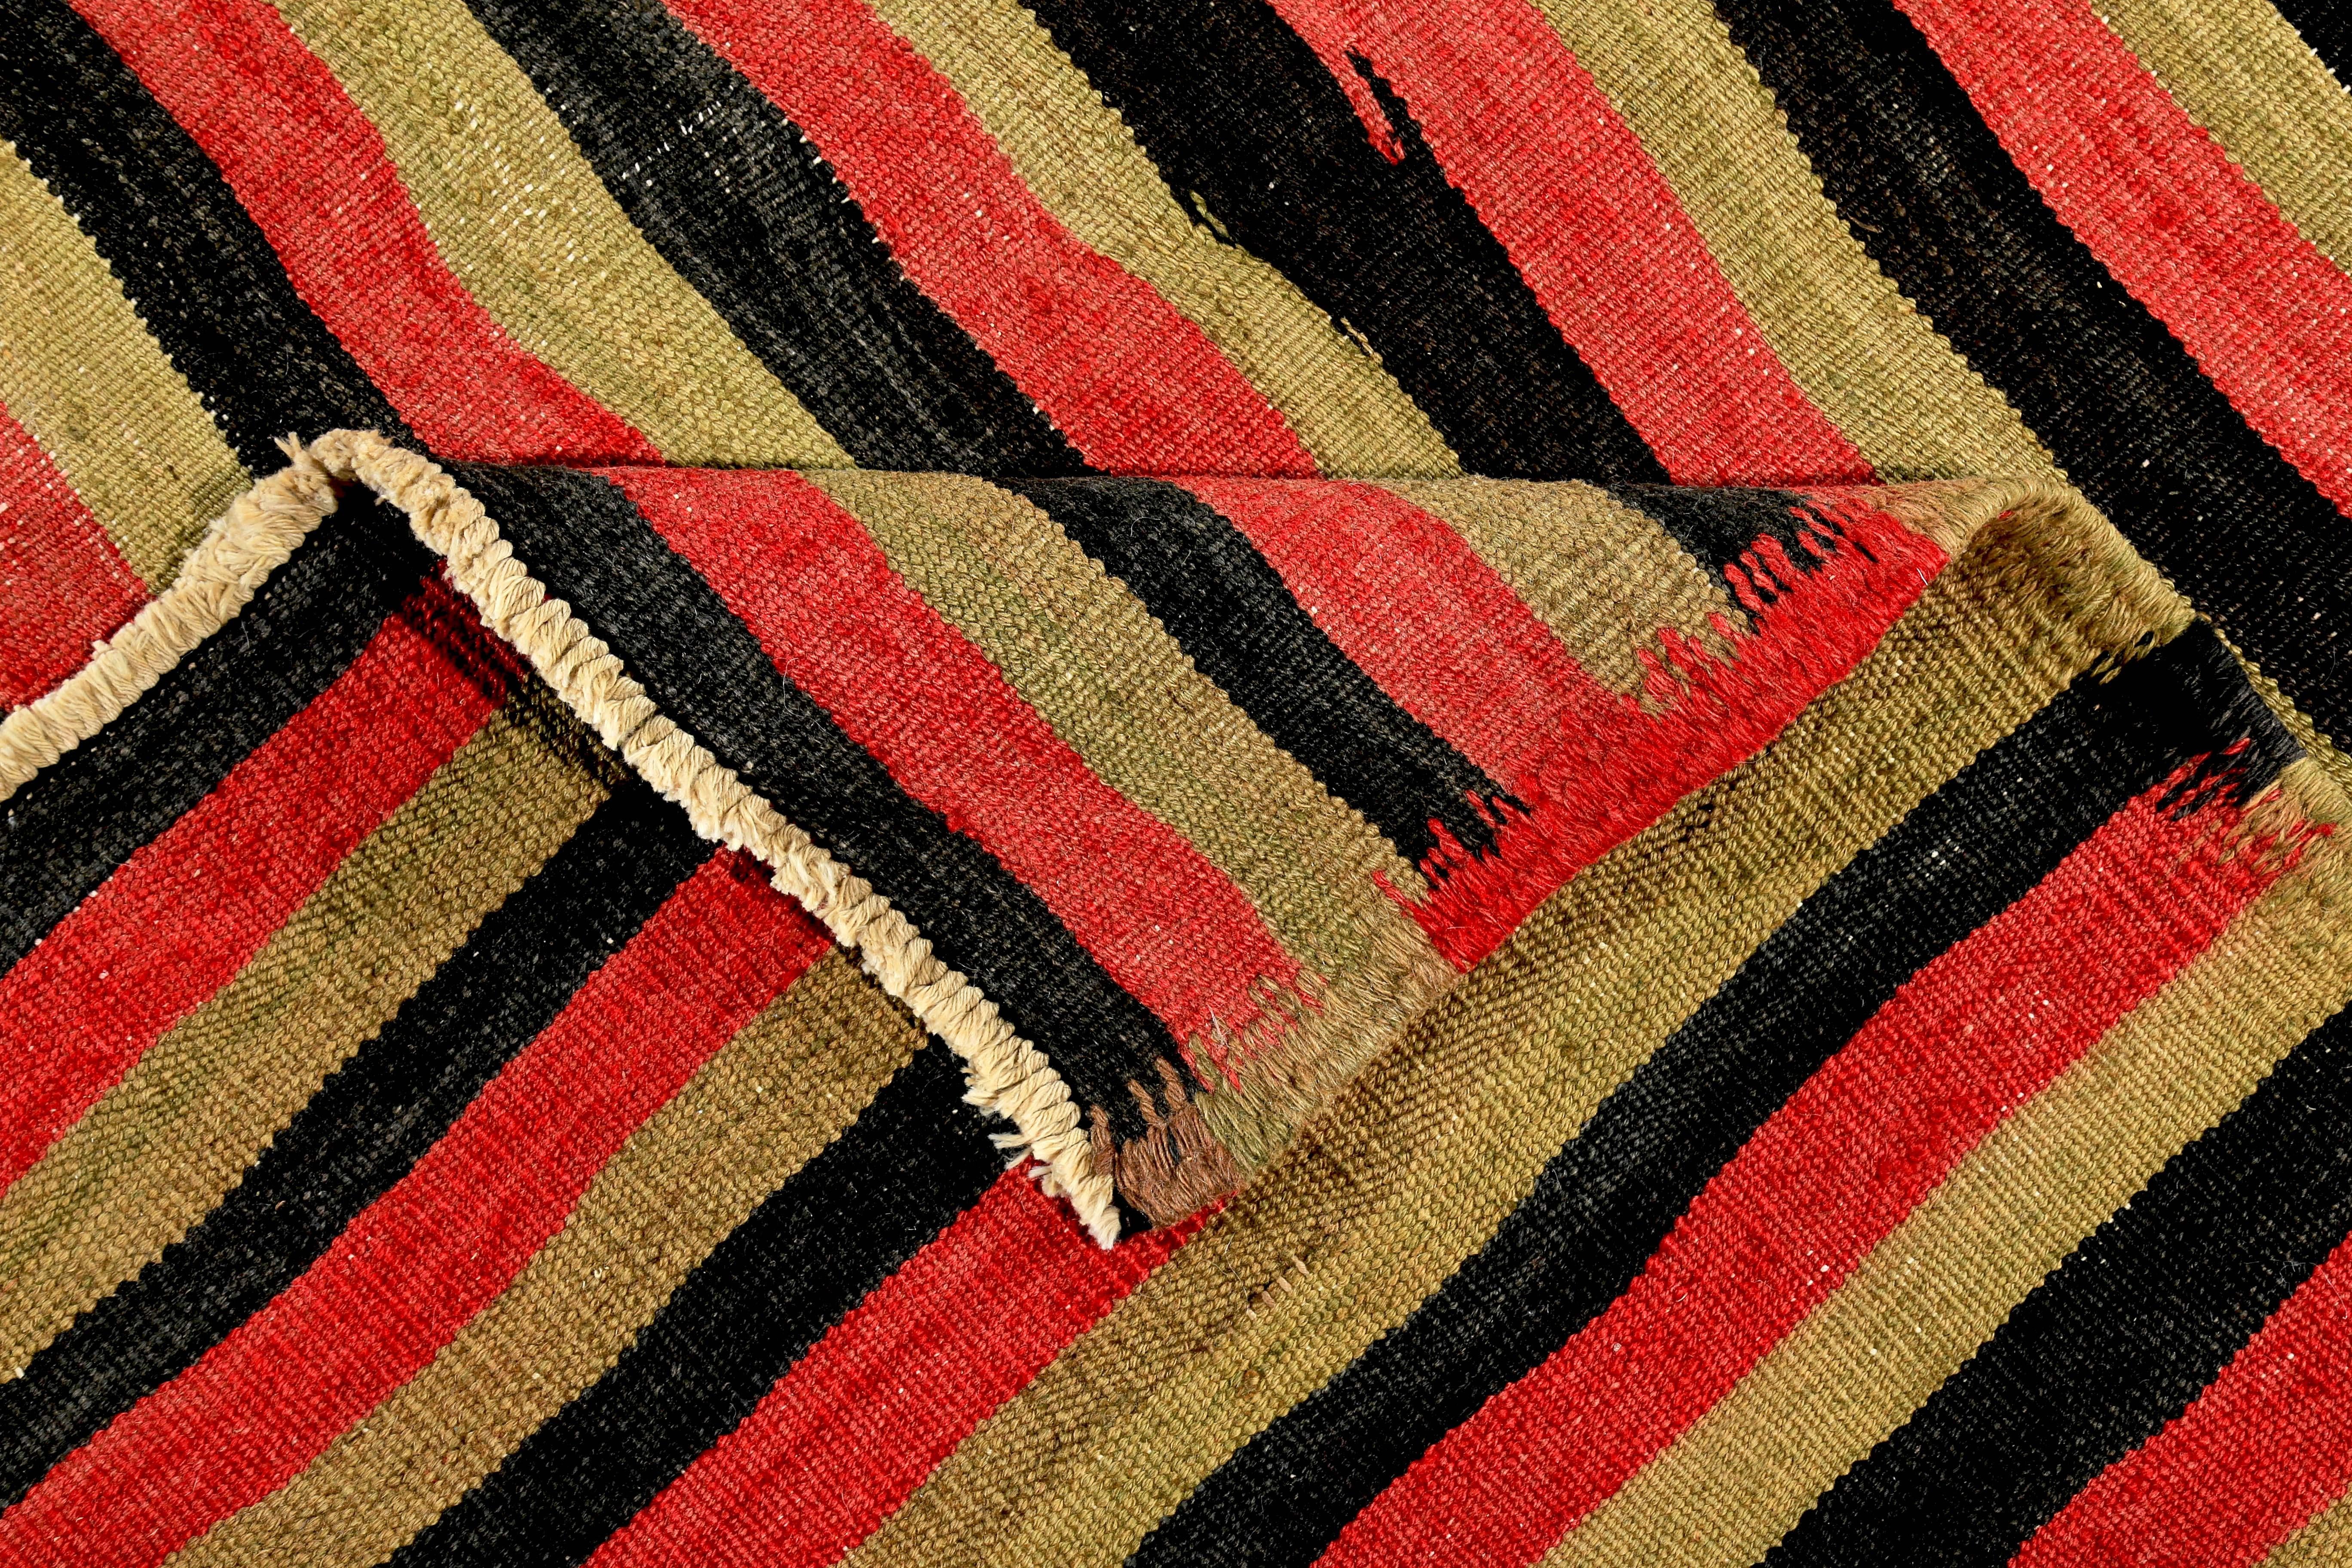 Turkish Kilim Rug with Black and Red Tribal Stripes on Gold Field For Sale 1